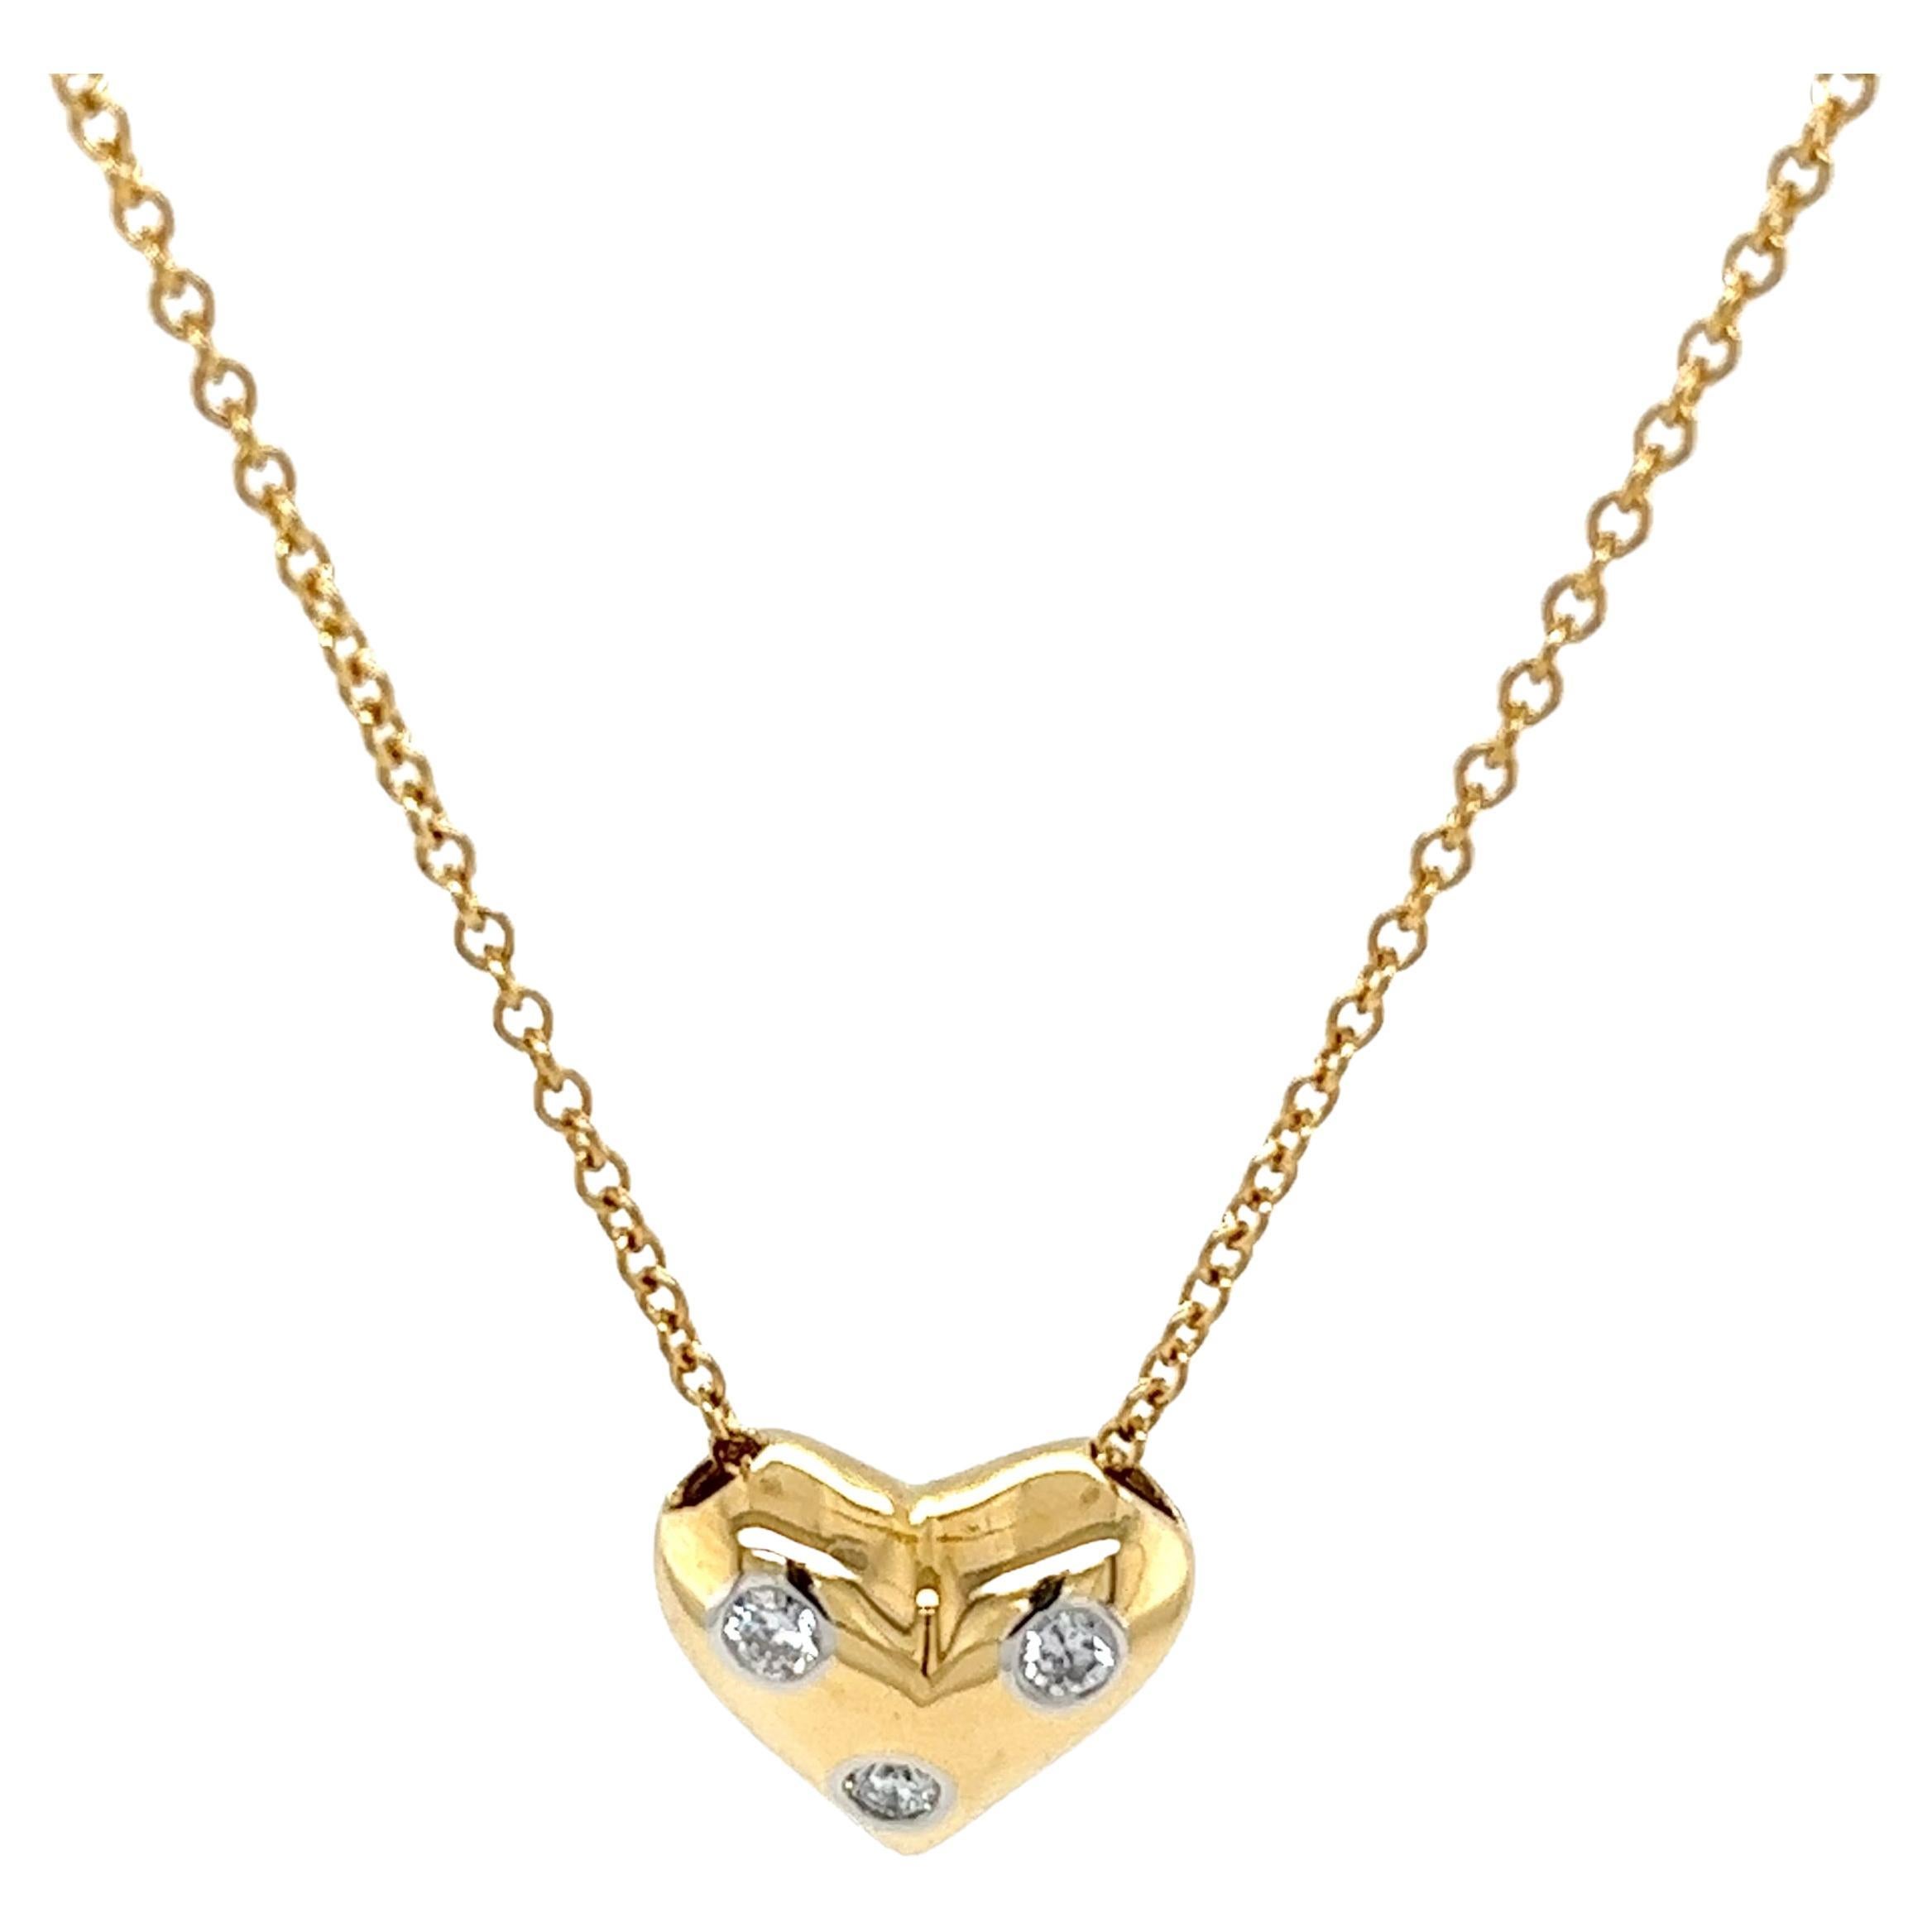 Tiffany & Co. Etoile Diamond Heart Necklace in 18ct Yellow Gold For Sale